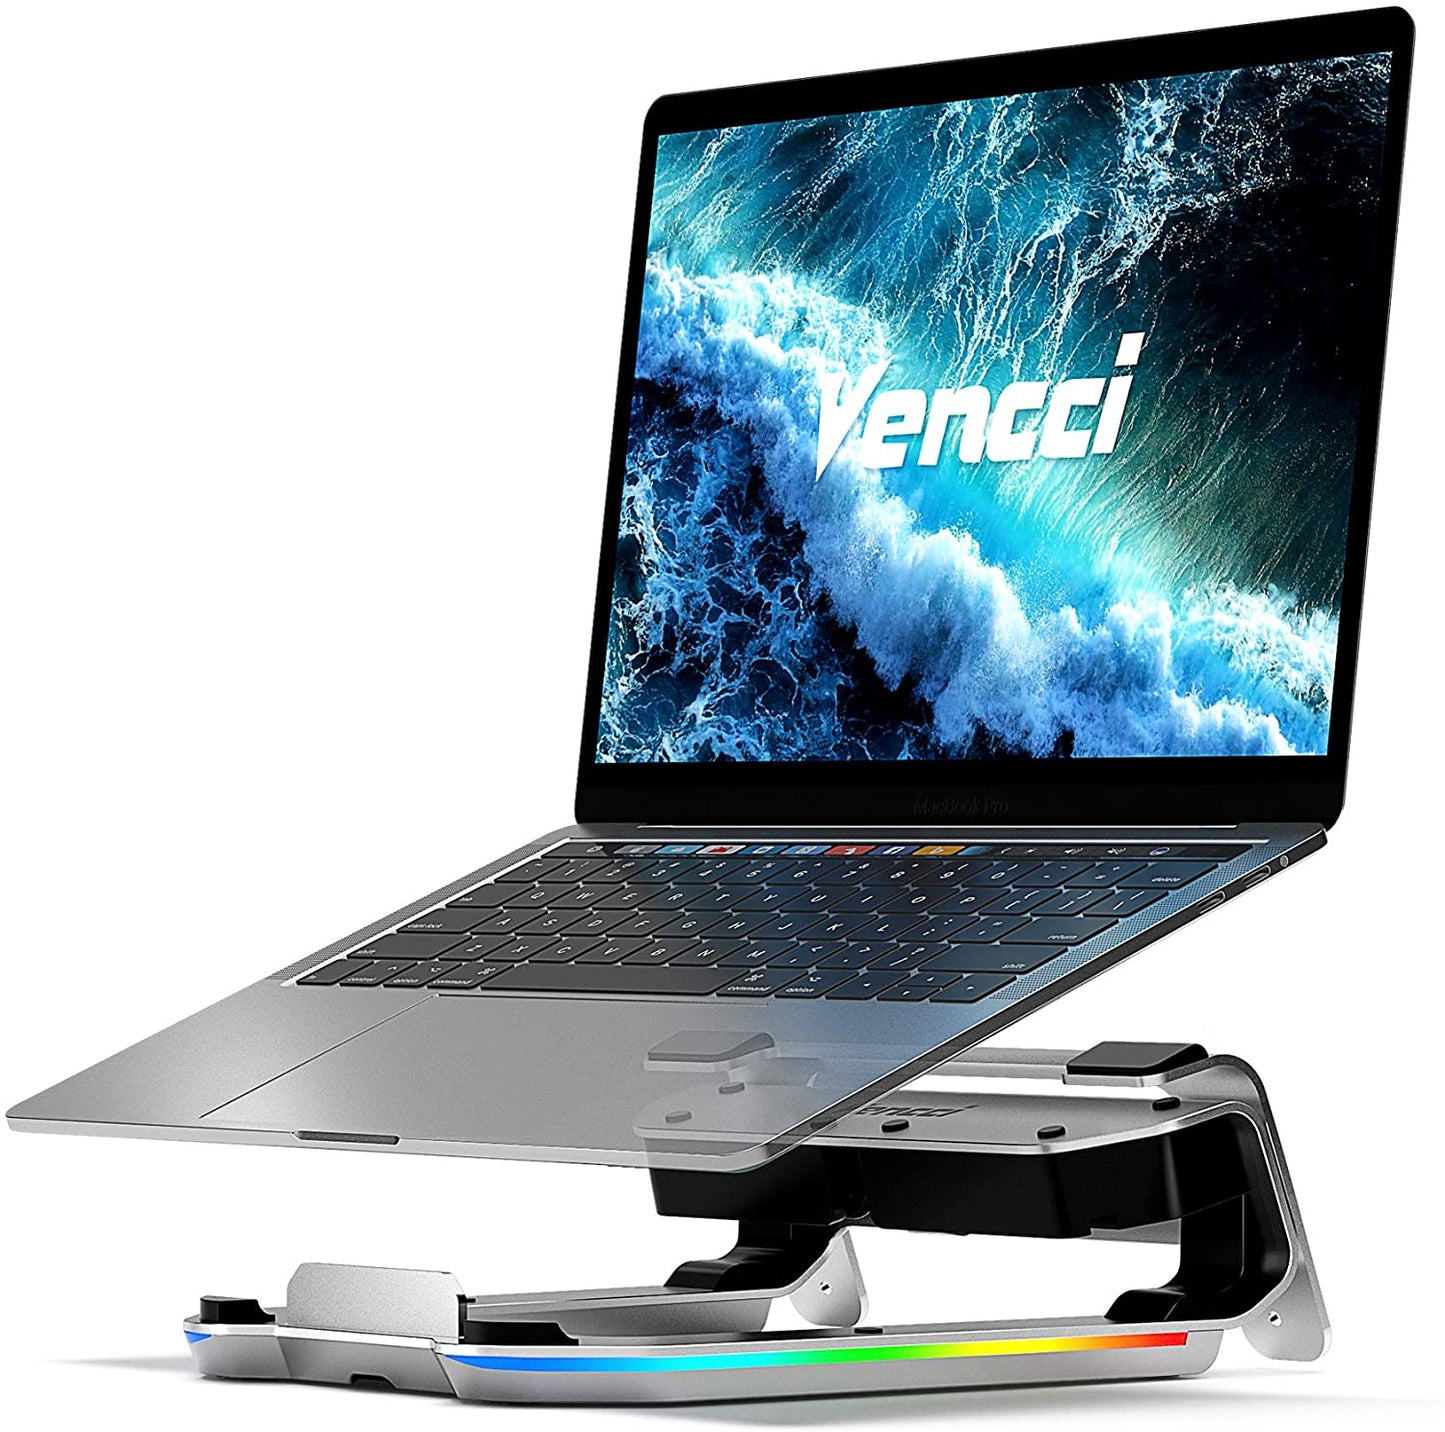 Laptop Stand for Desk Ergonomic Aluminum Computer Laptop Riser Holder with 8-in-1 USB C Hub RGB Light Adjustable Height Compatible with MacBook Pro Air HP XPS and More Type C Devices